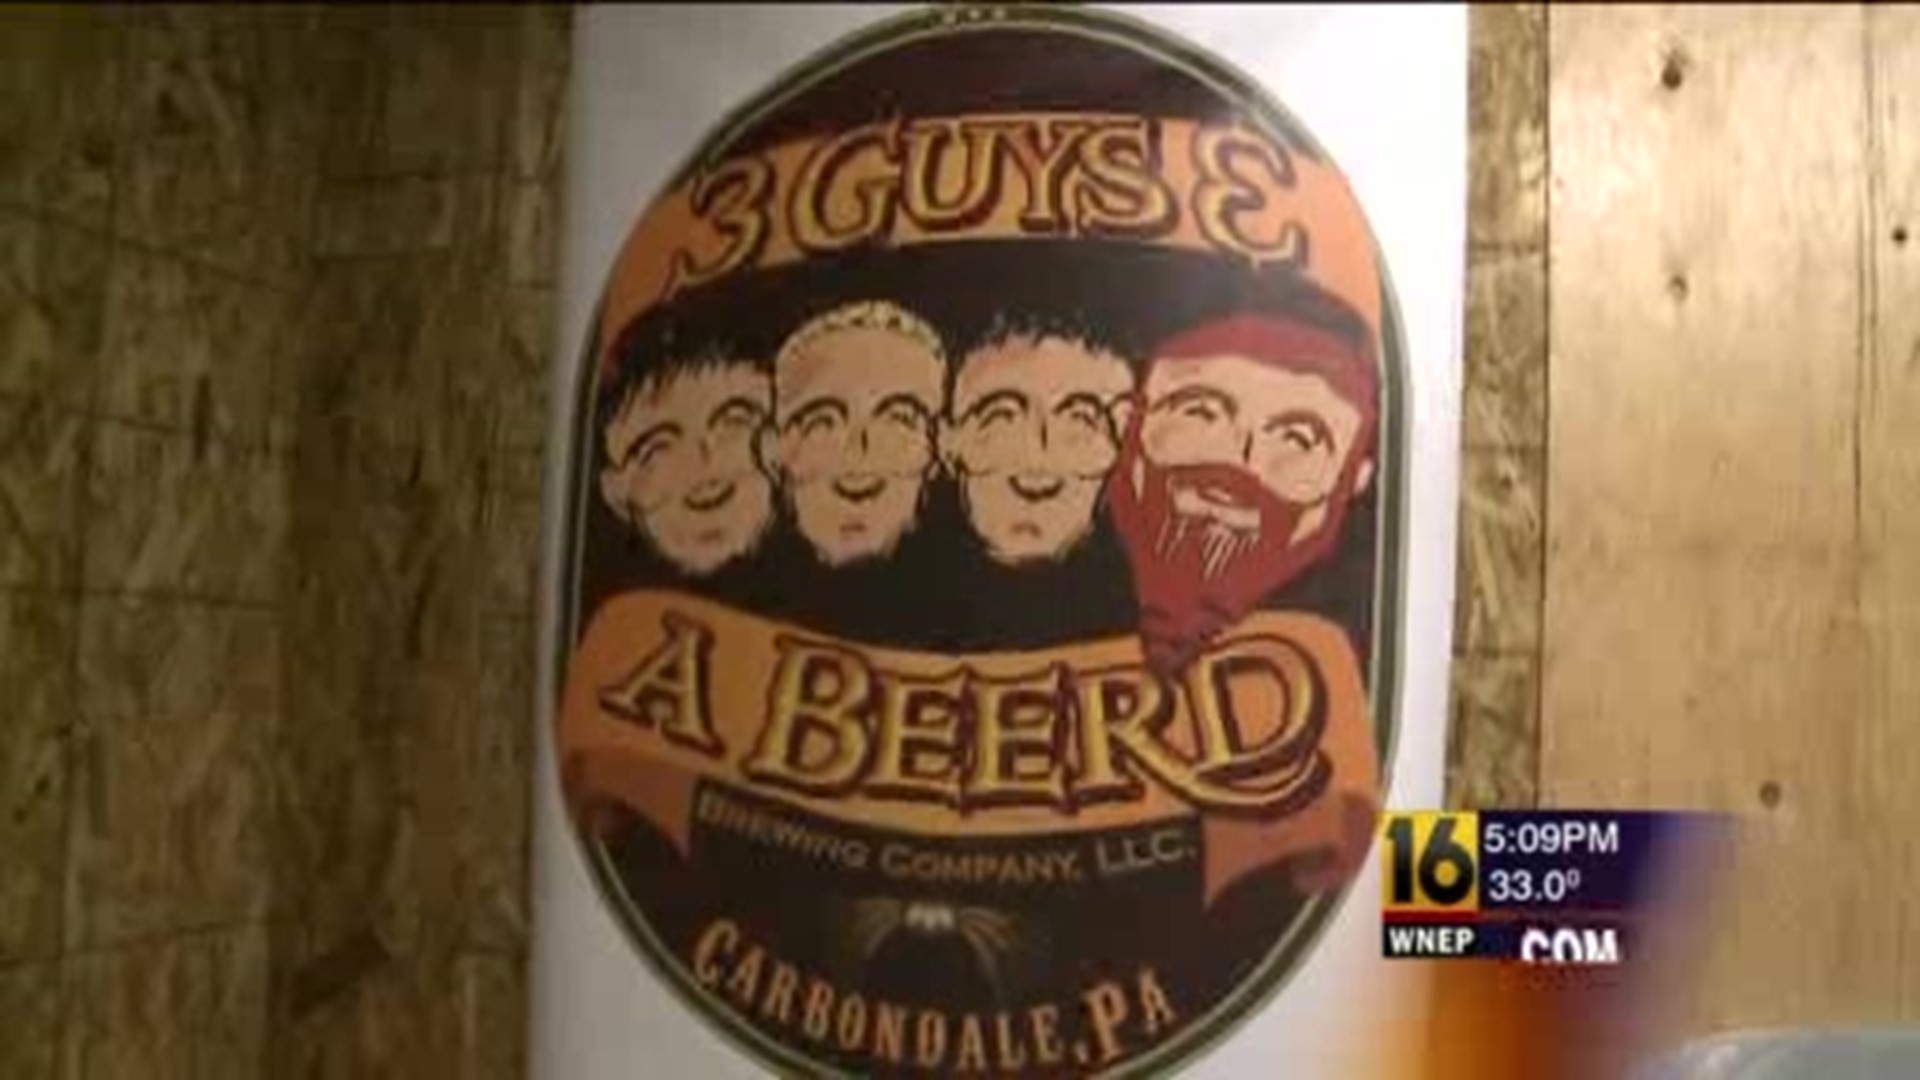 New Brewery Opens in Carbondale